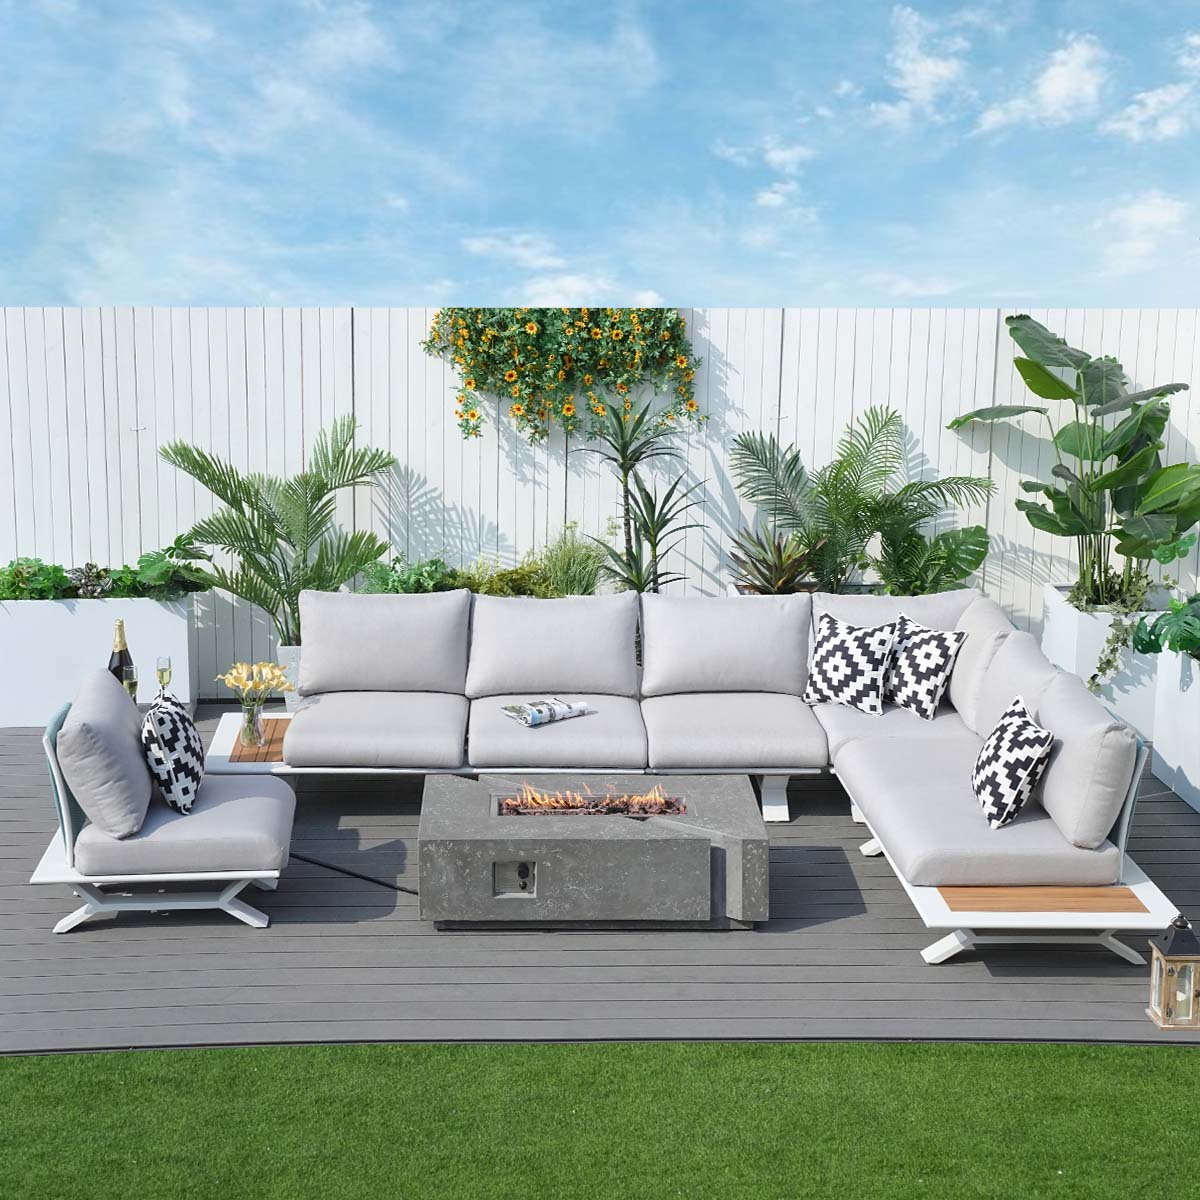 The latest furniture on the market - Abrihome White 6-Pieces Patio Garden Aluminum Seating Set